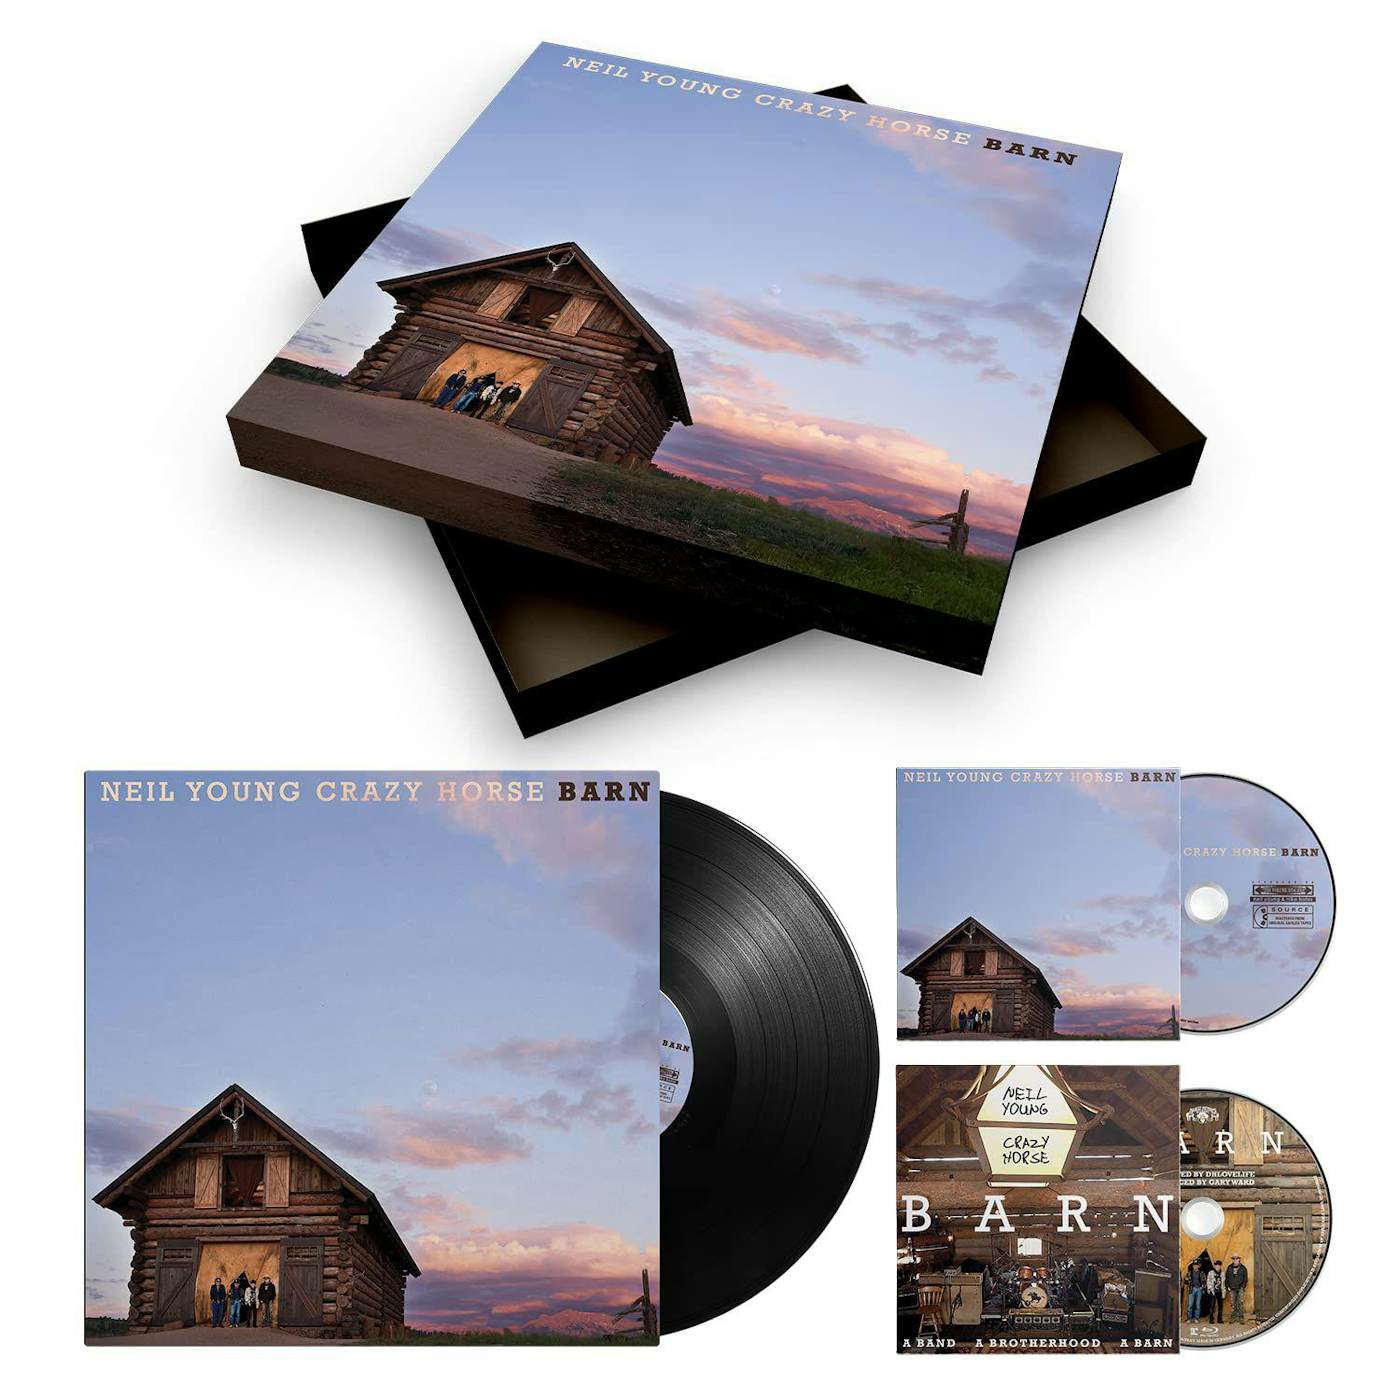 Neil Young & Crazy Horse BARN (Deluxe Edition) Vinyl Record